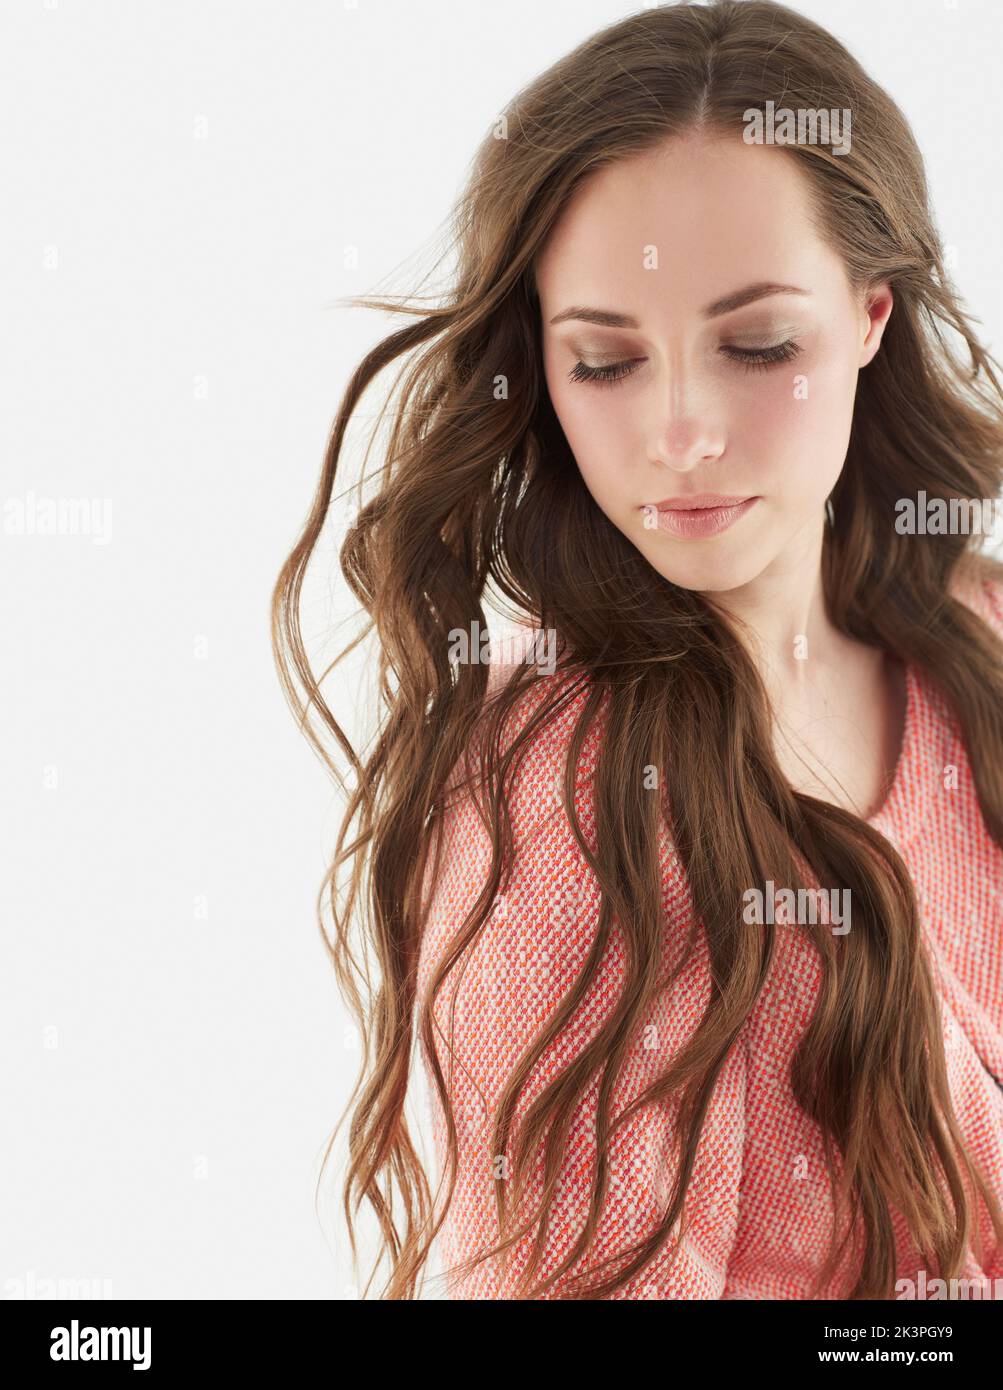 Thinking of past times. Studio portrait of an attractive young woman. Stock Photo